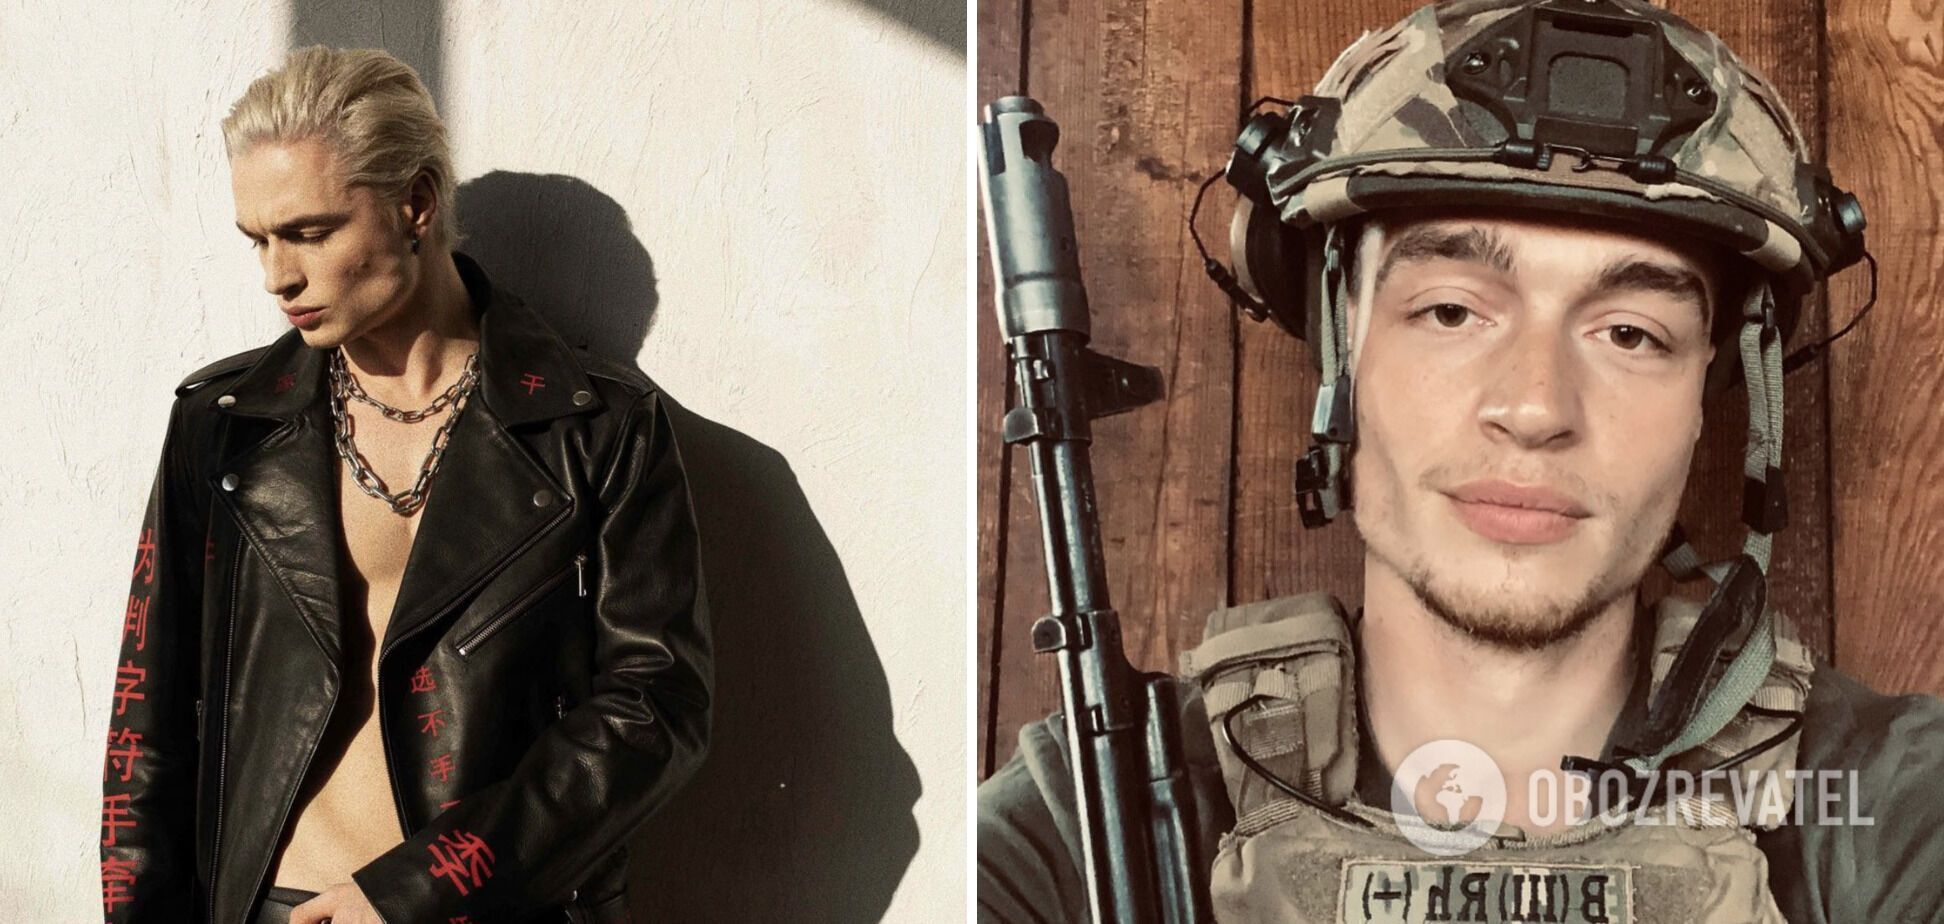 Nazar Grabar before and after his service in the Armed Forces of Ukraine.